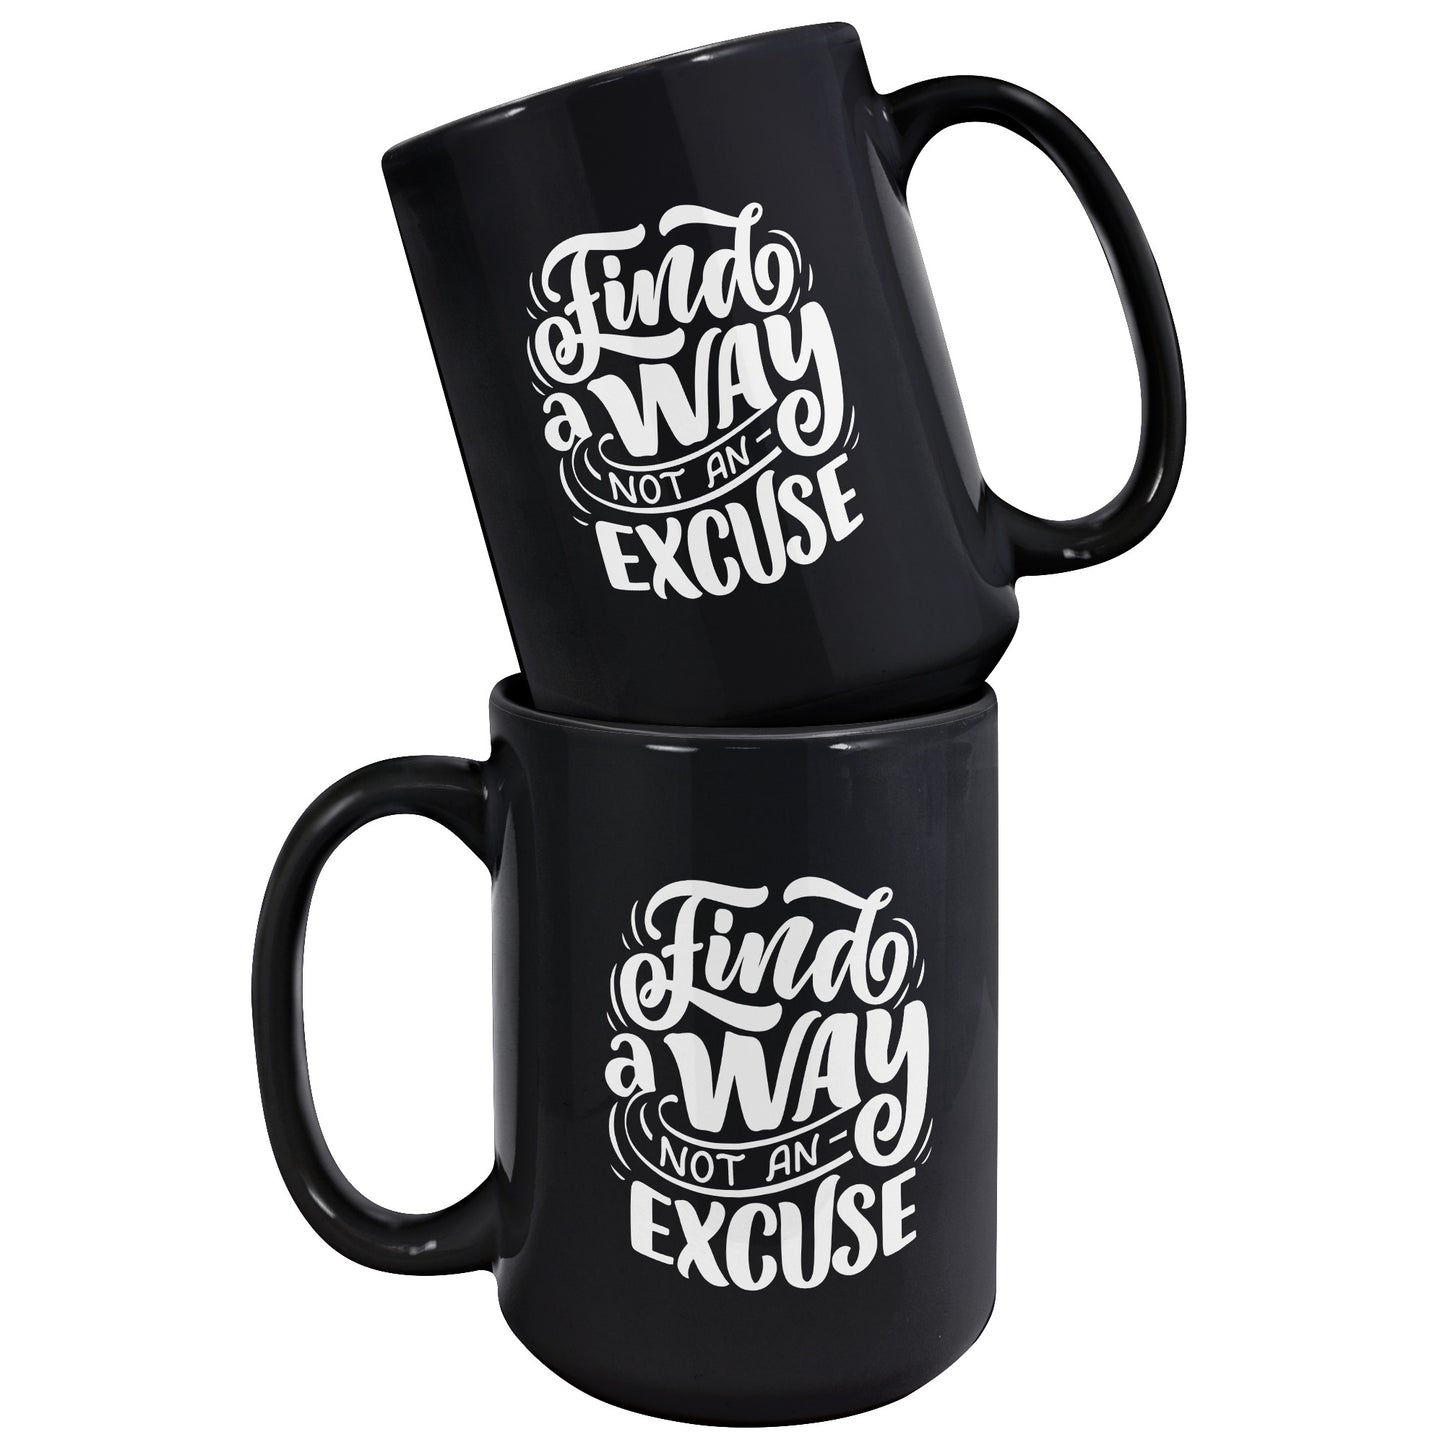 Motivational mug for the one who needs a little push with their tea